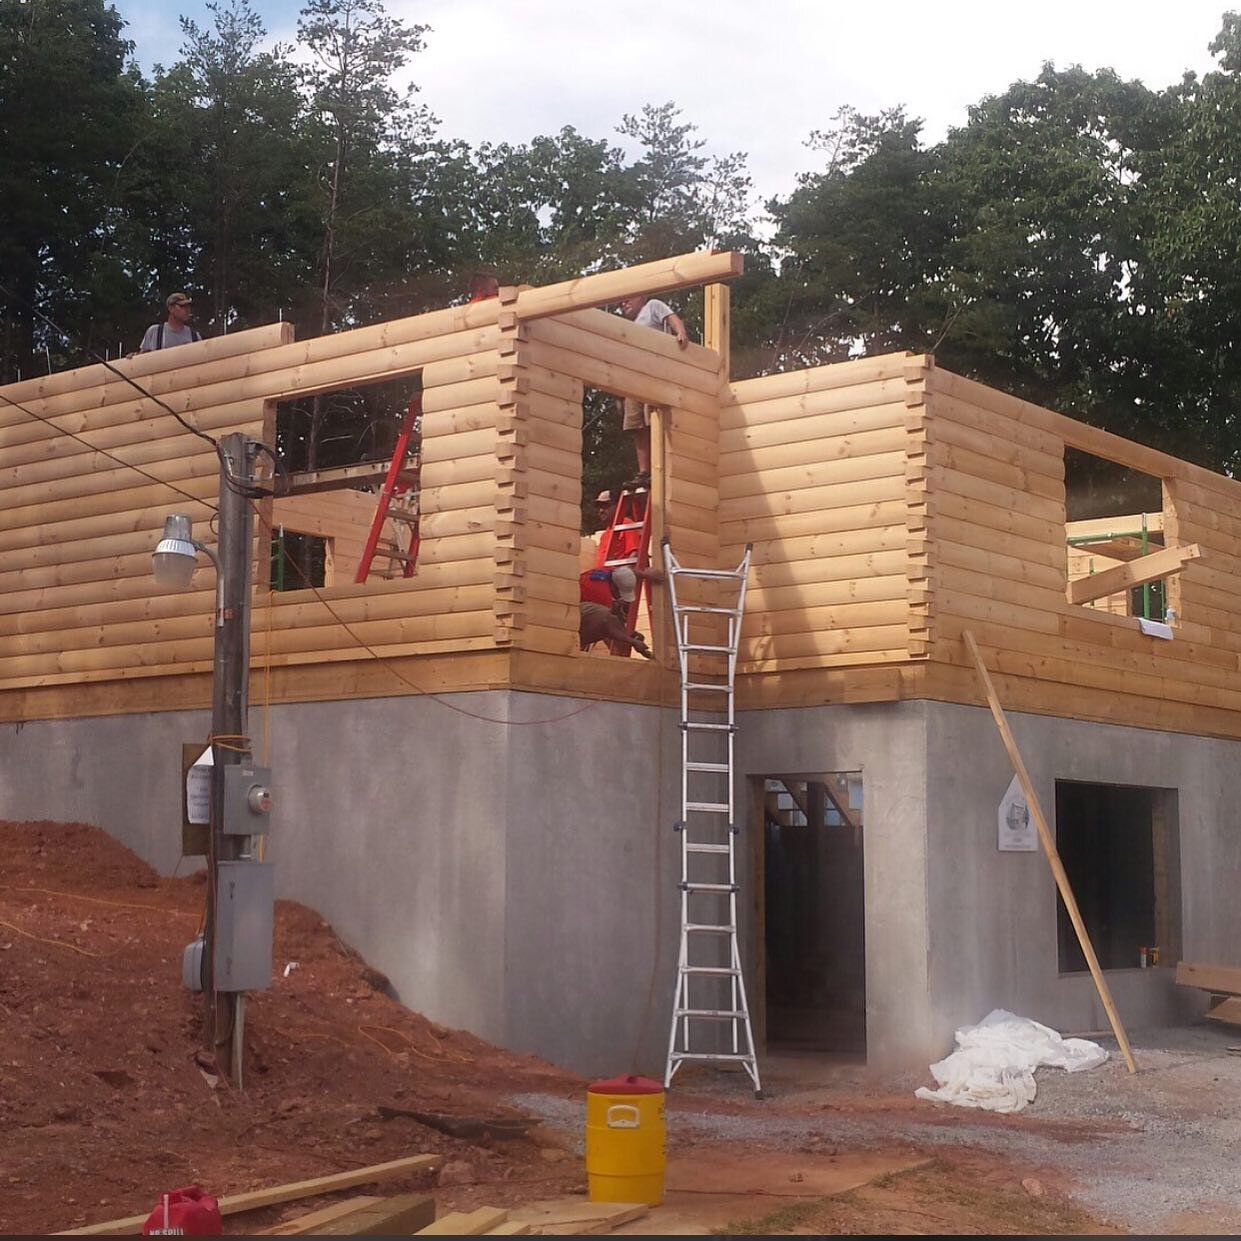 There are fewer things more exciting than seeing your log home or timber frame home coming together! 🏗🏚
&bull;
&bull;
&bull;
#loghomes #loghomedreams #timberframes #timberframehomes #northcarolina #inmymindimgonetocarolina